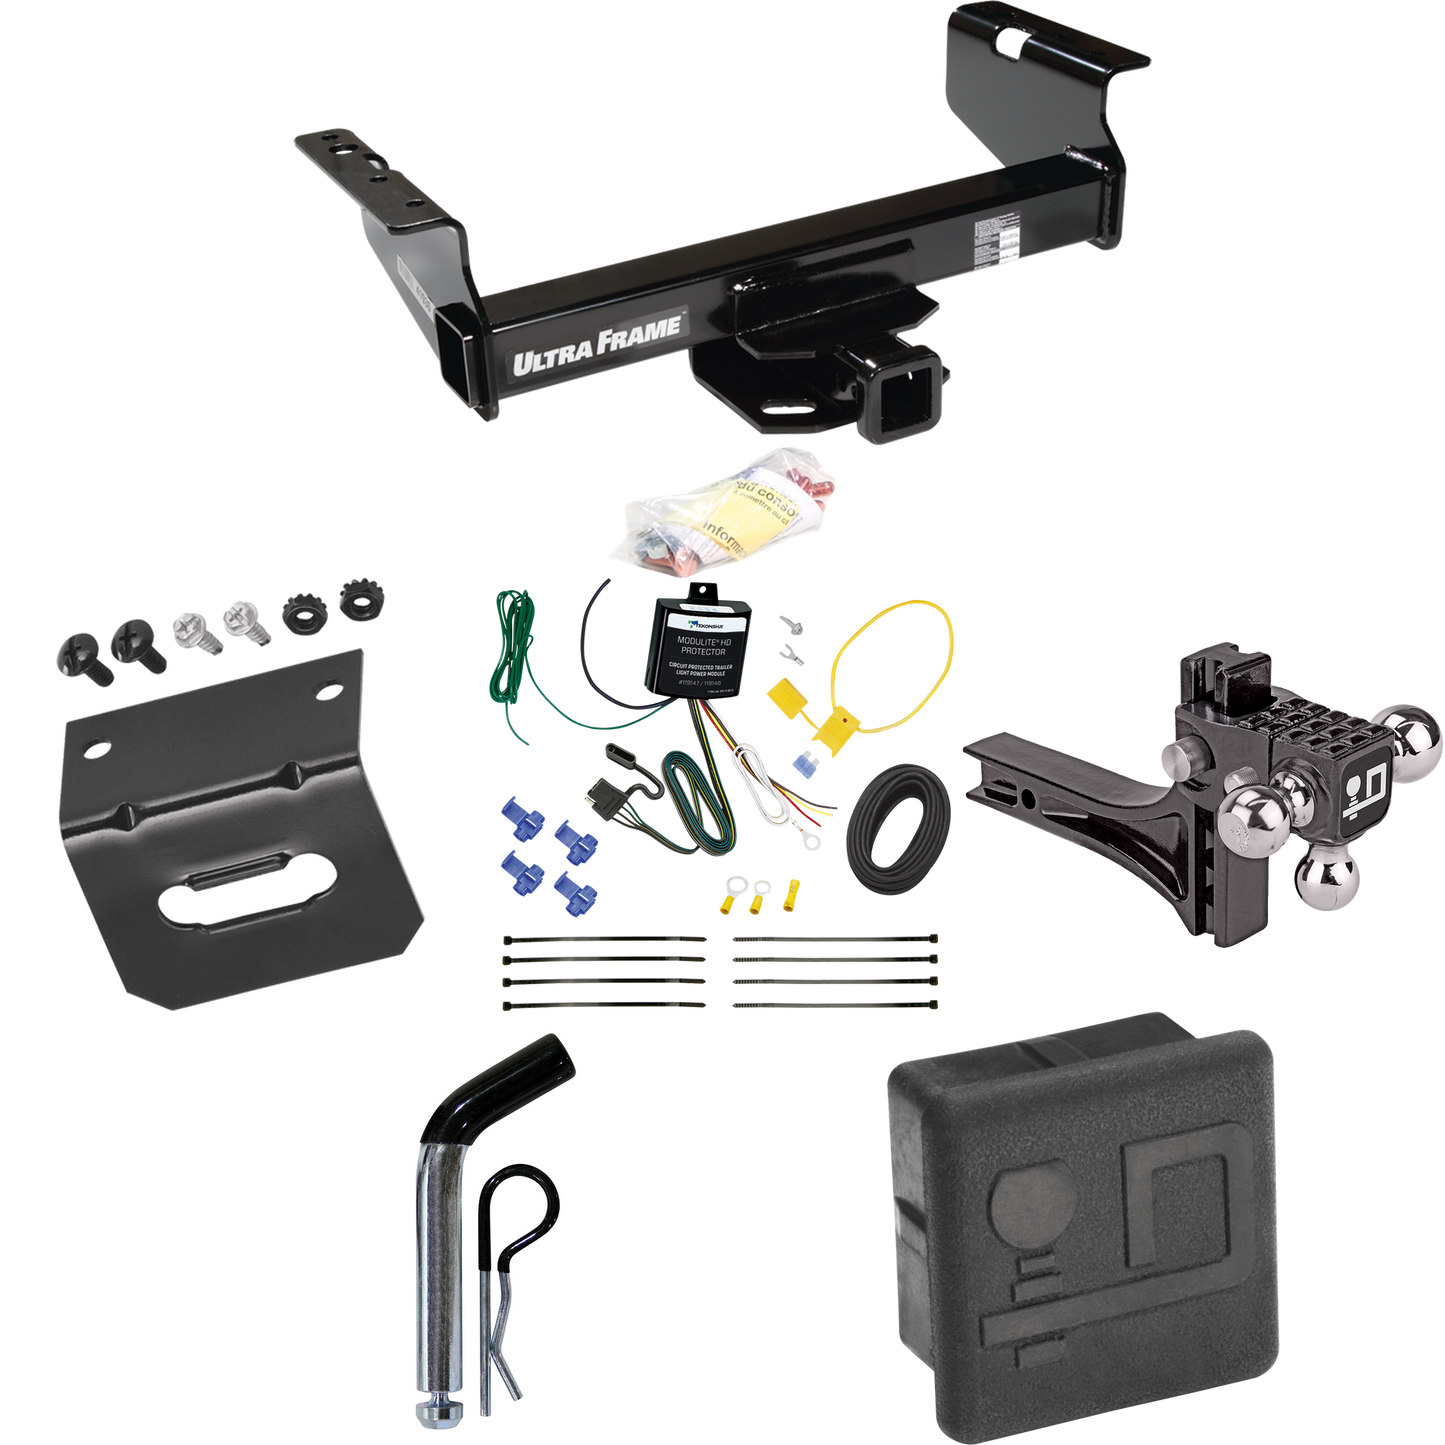 Fits 2007-2024 GMC Sierra 3500 HD Trailer Hitch Tow PKG w/ 4-Flat Wiring Harness + Adjustable Drop Rise Triple Ball Ball Mount 1-7/8" & 2" & 2-5/16" Trailer Balls + Pin/Clip + Hitch Cover + Wiring Bracket (For Cab & Chassis, w/34" Wide Frames Models)